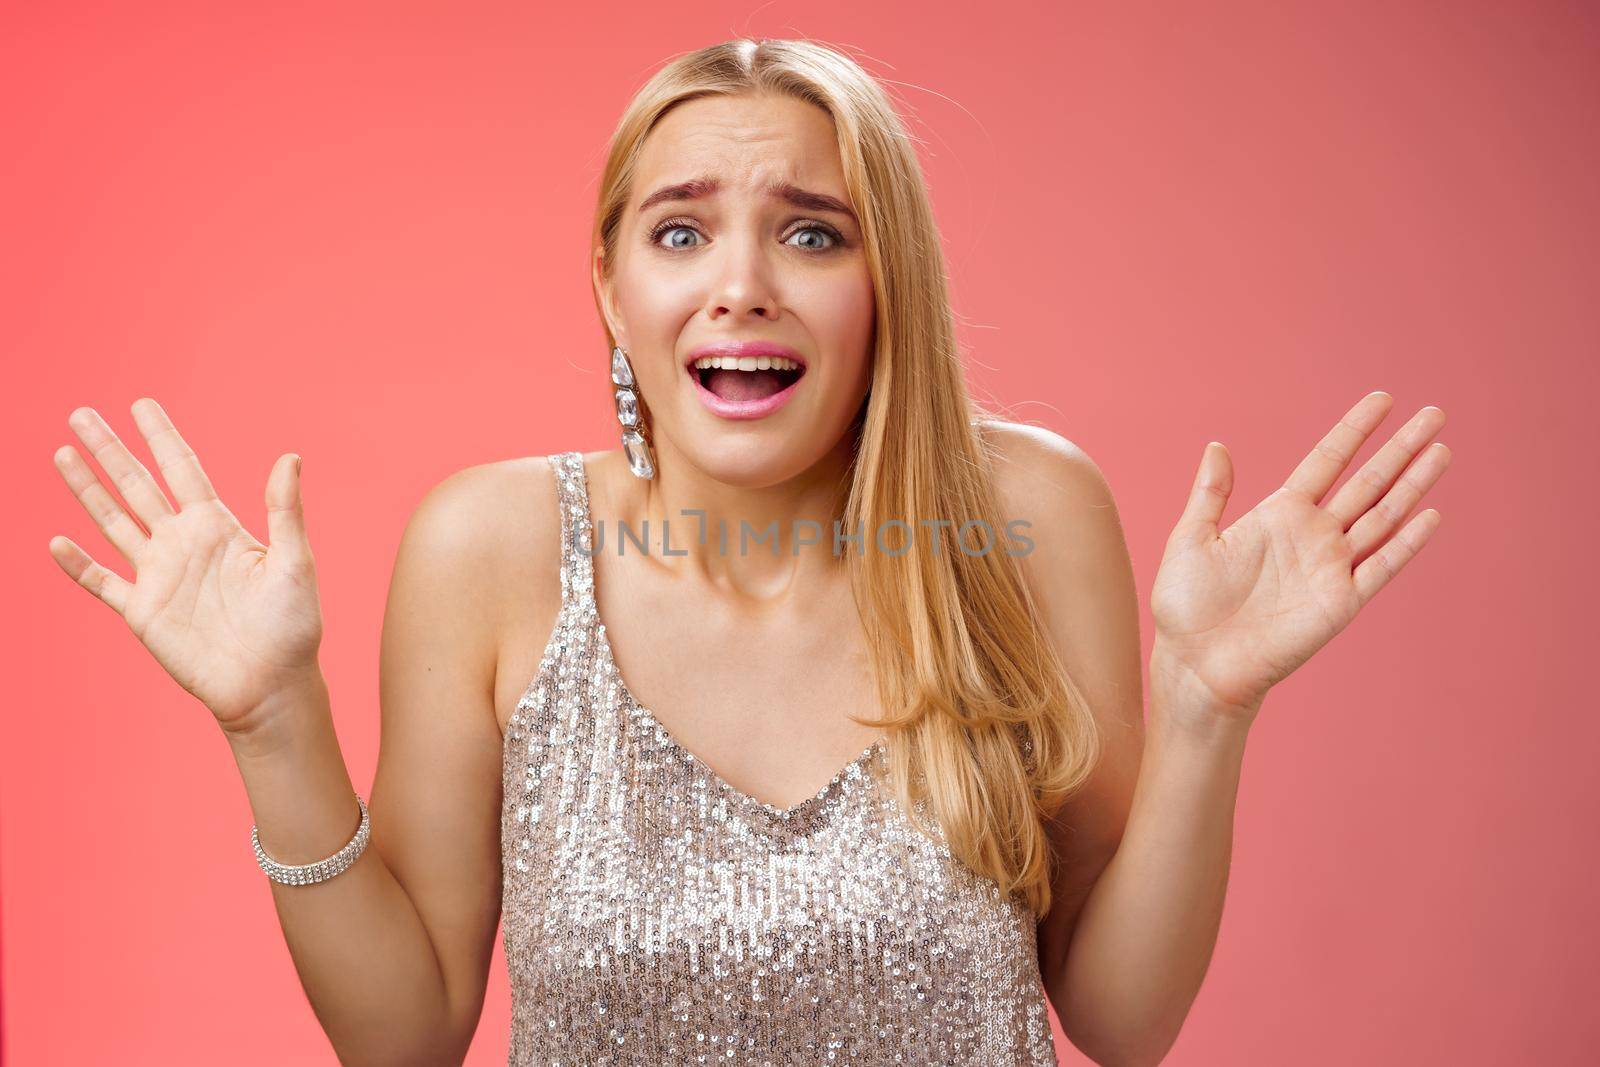 Lifestyle. Freaked-out nervous young girl worry party not go well panicking gesturing raised hands worried frowning grimacing complaining friends feel unconfident unsure standing silver dress red background.